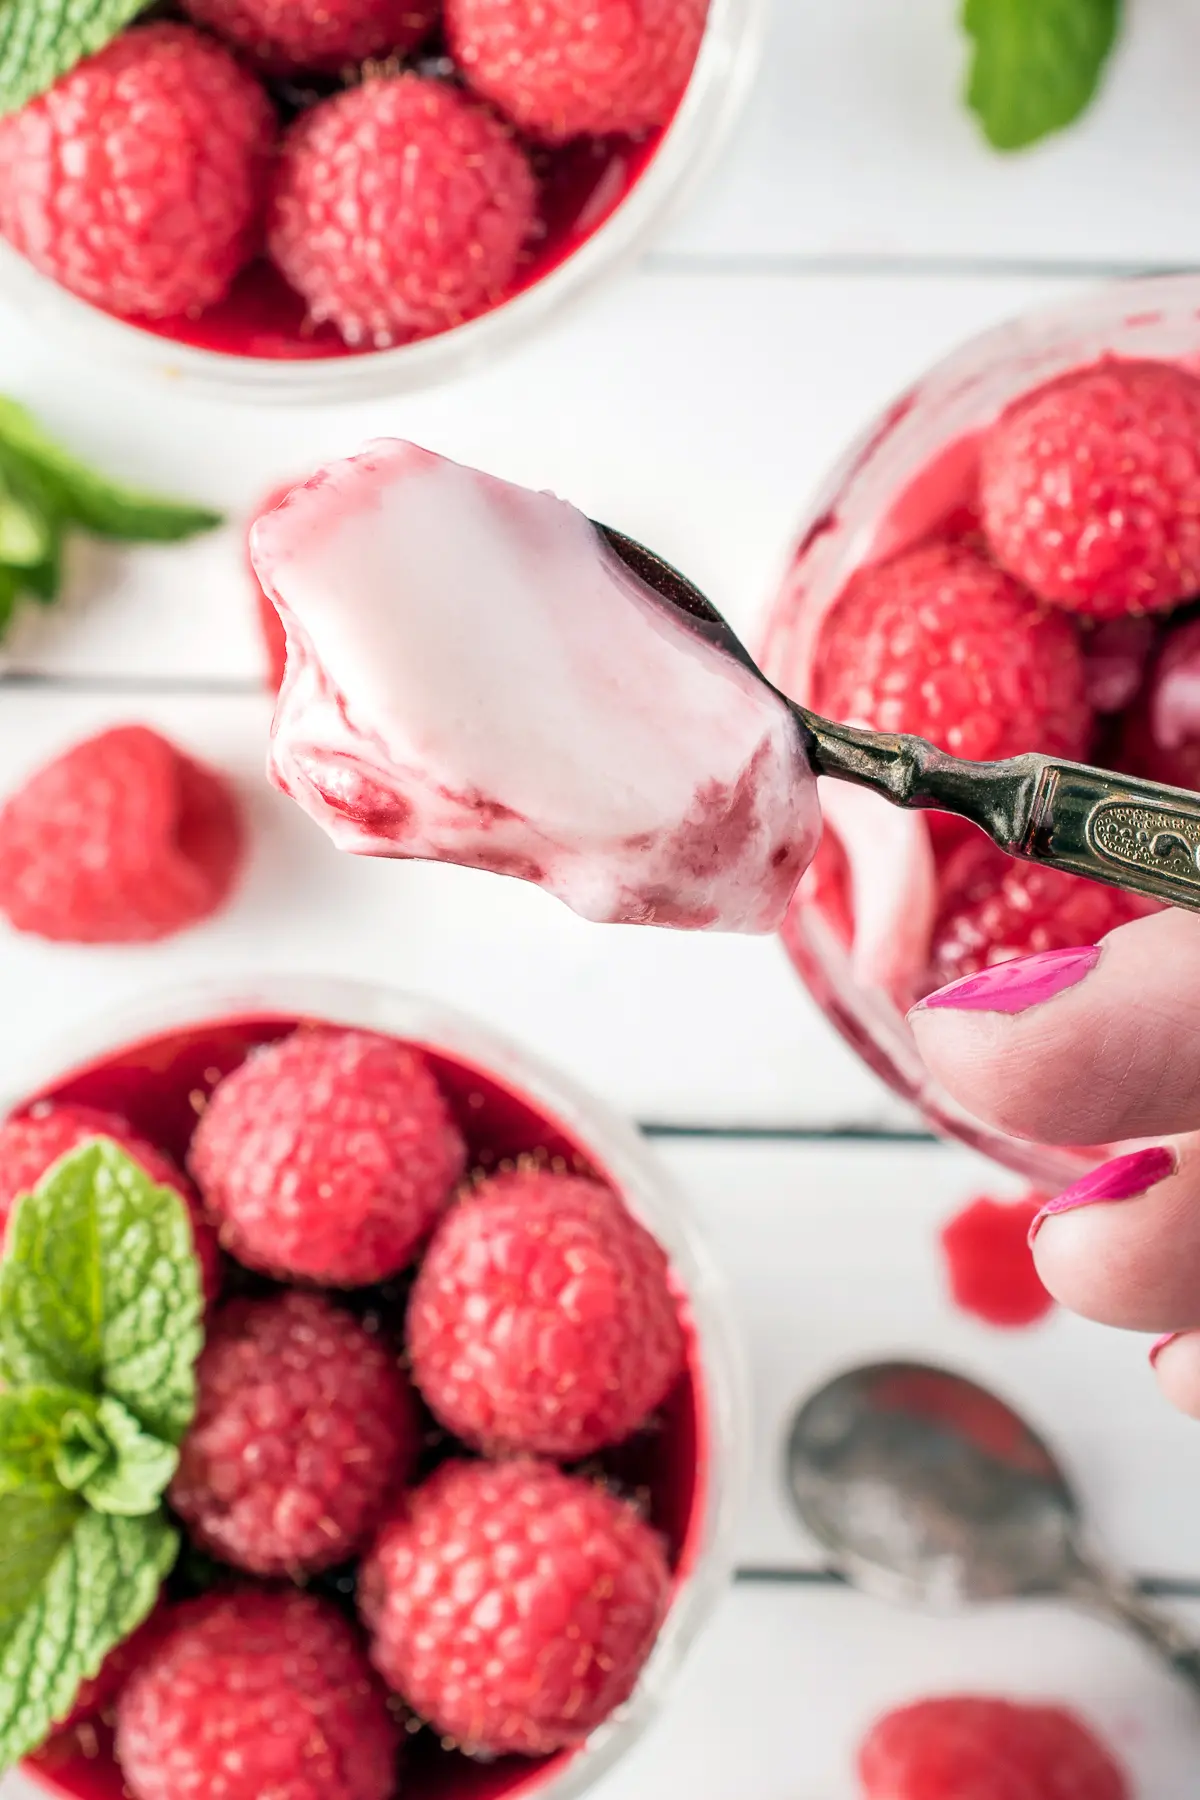 A few fingers are holding a raised teaspoon loaded with raspberry Panna Cotta. The background is white with a few blurred dessert glasses filled with Panna Cotta in the background.